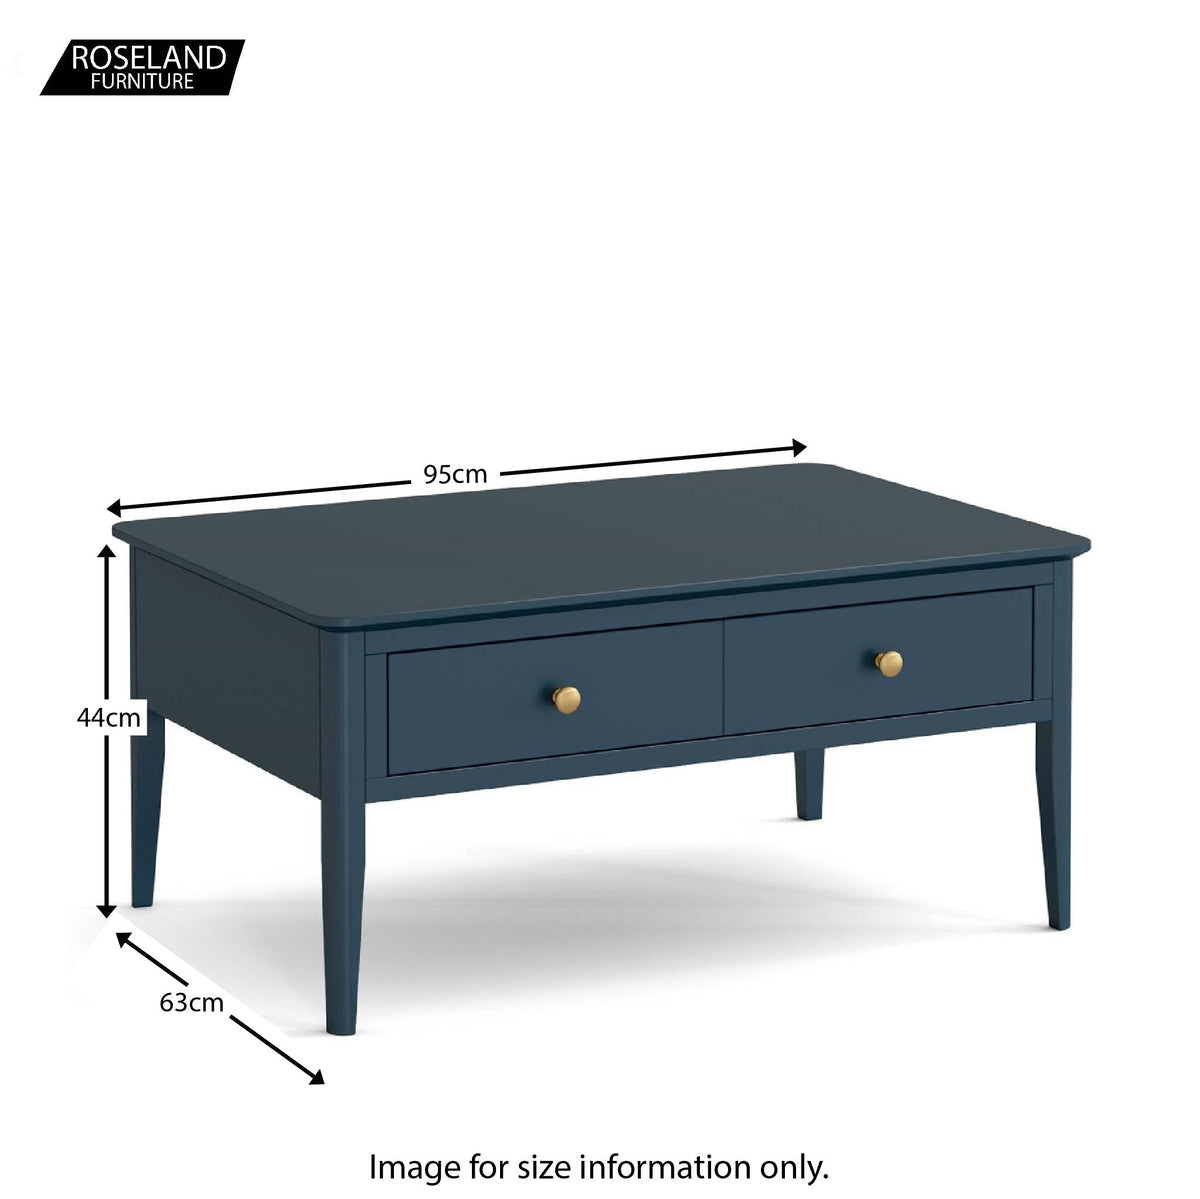 Stirling Blue Coffee Table  size guide